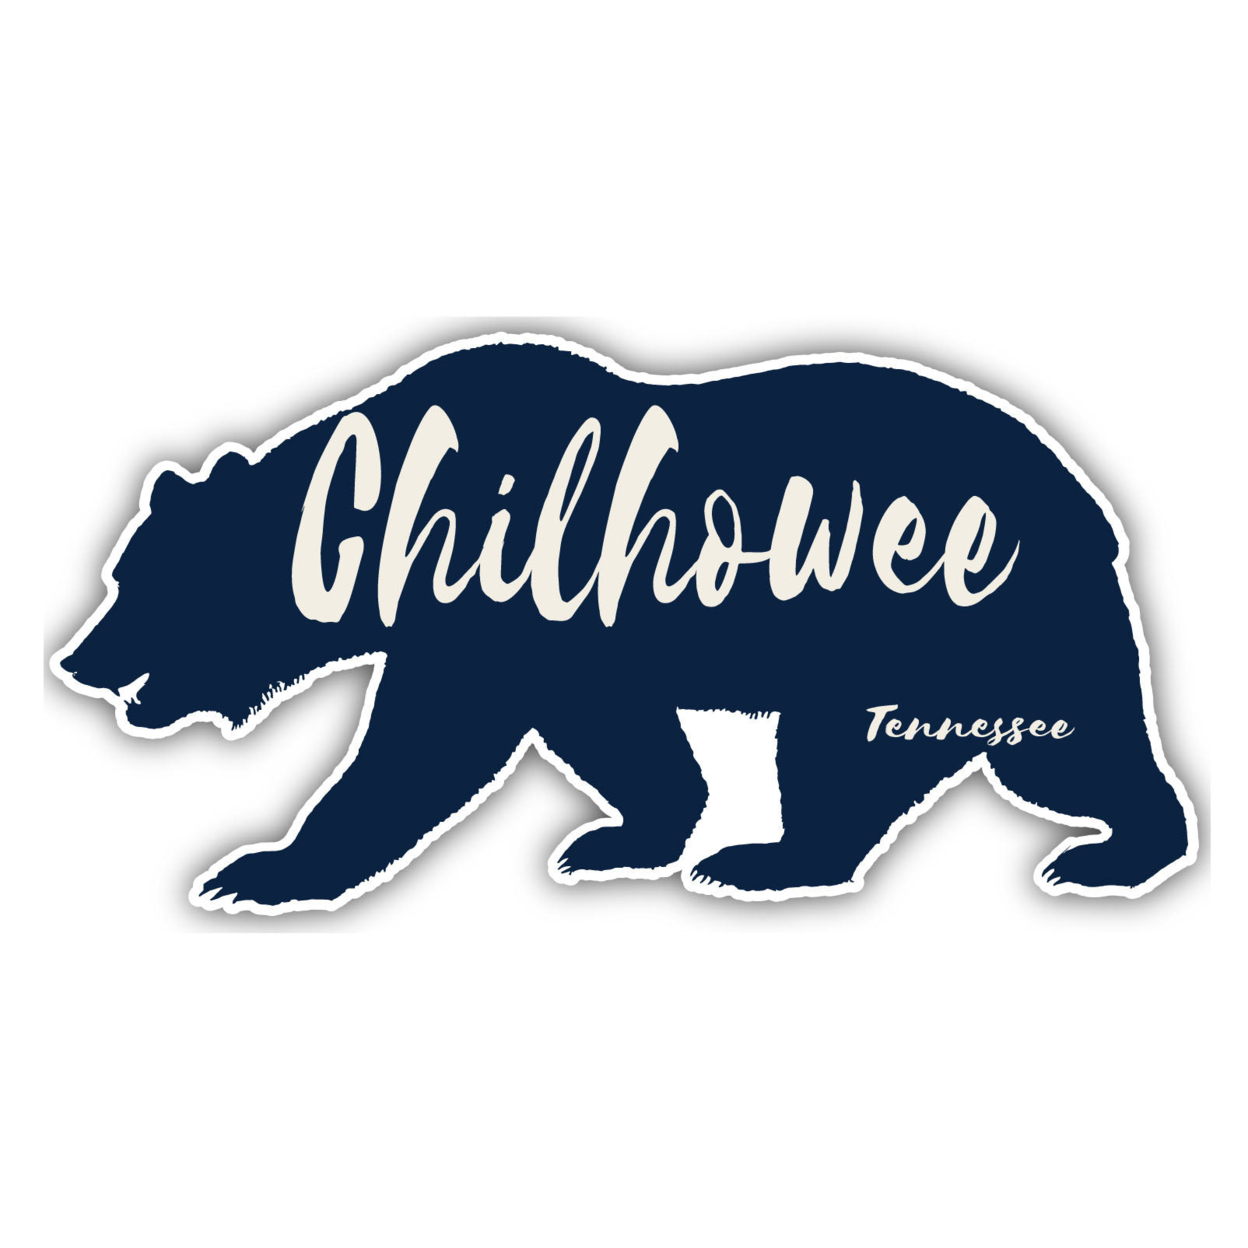 Chilhowee Tennessee Souvenir Decorative Stickers (Choose Theme And Size) - 4-Pack, 12-Inch, Bear